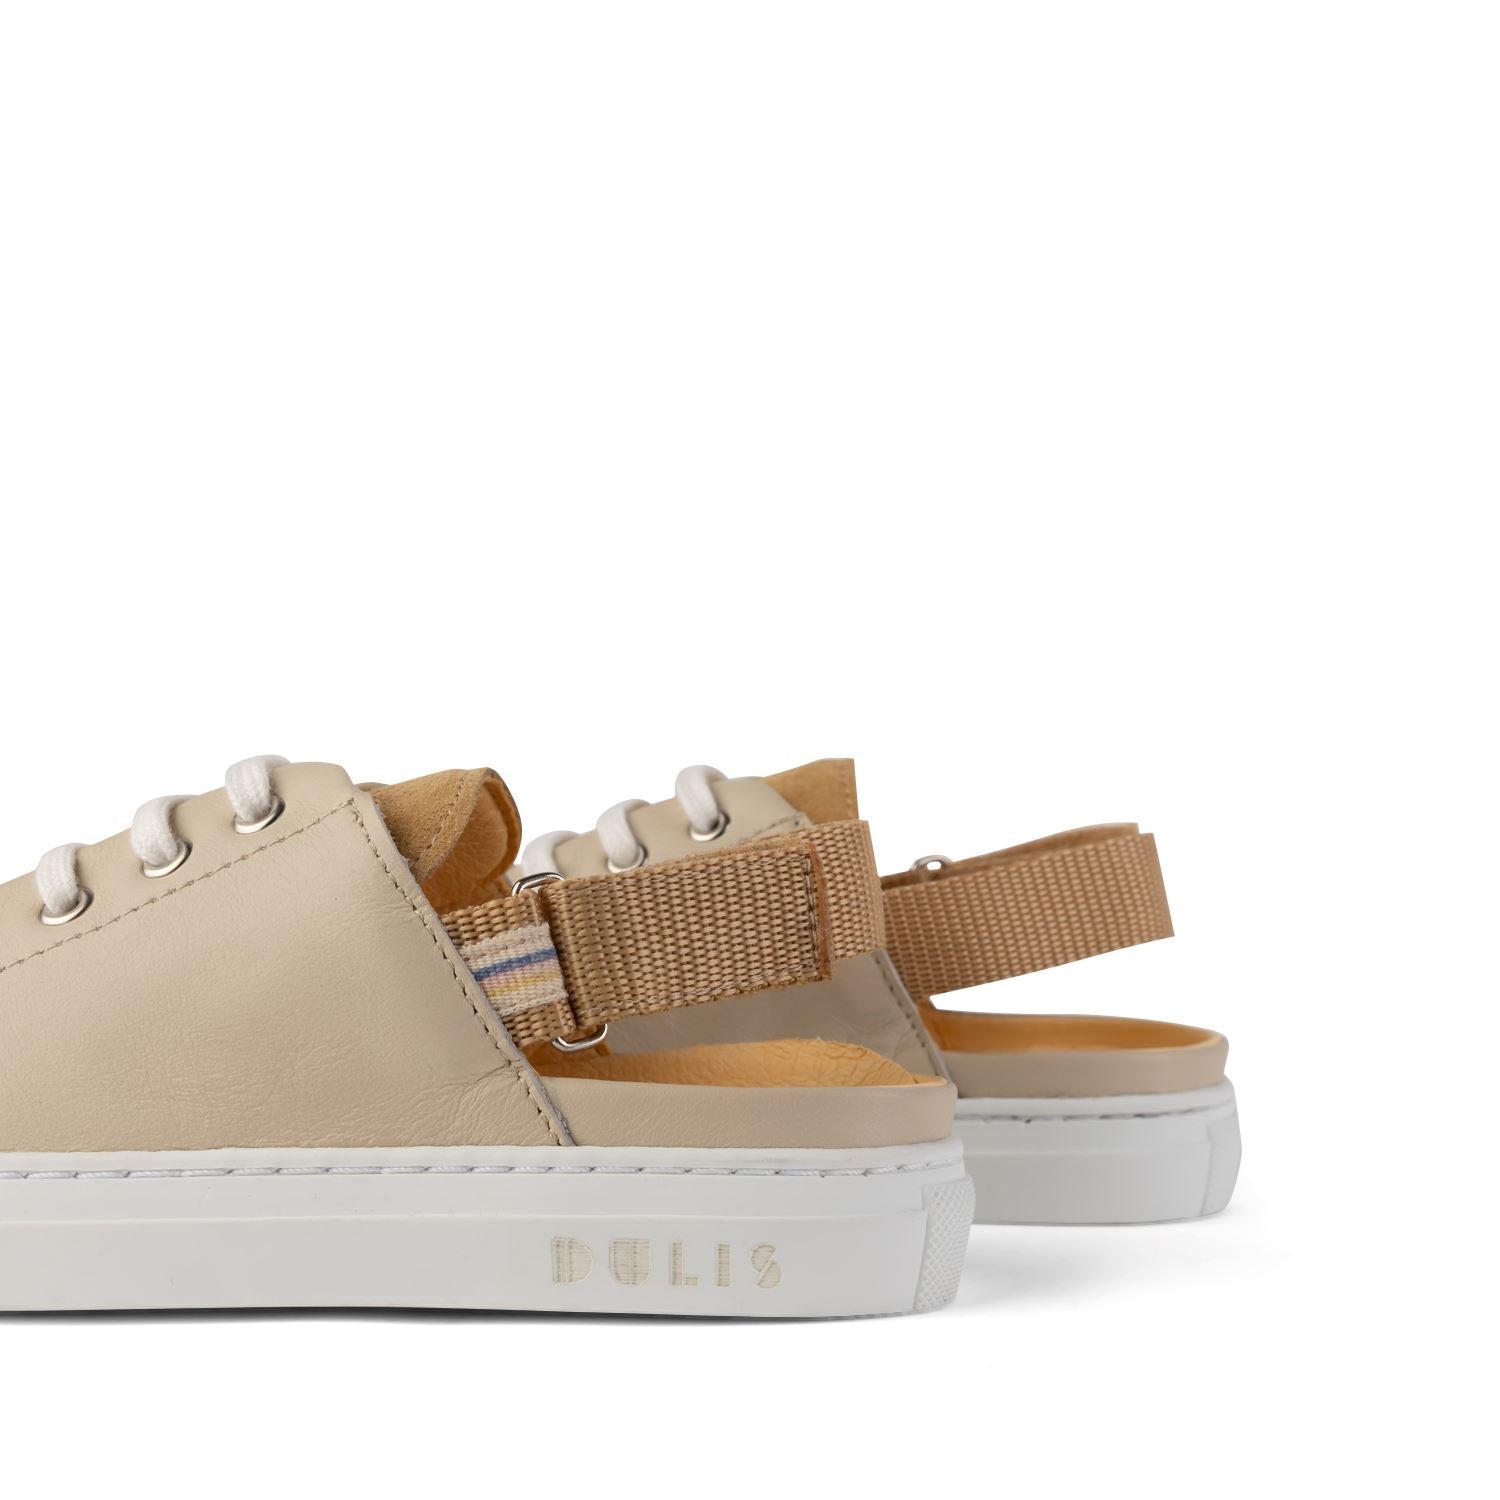 Beige Hybrid Sneakers Shoes Dulis Shoes 